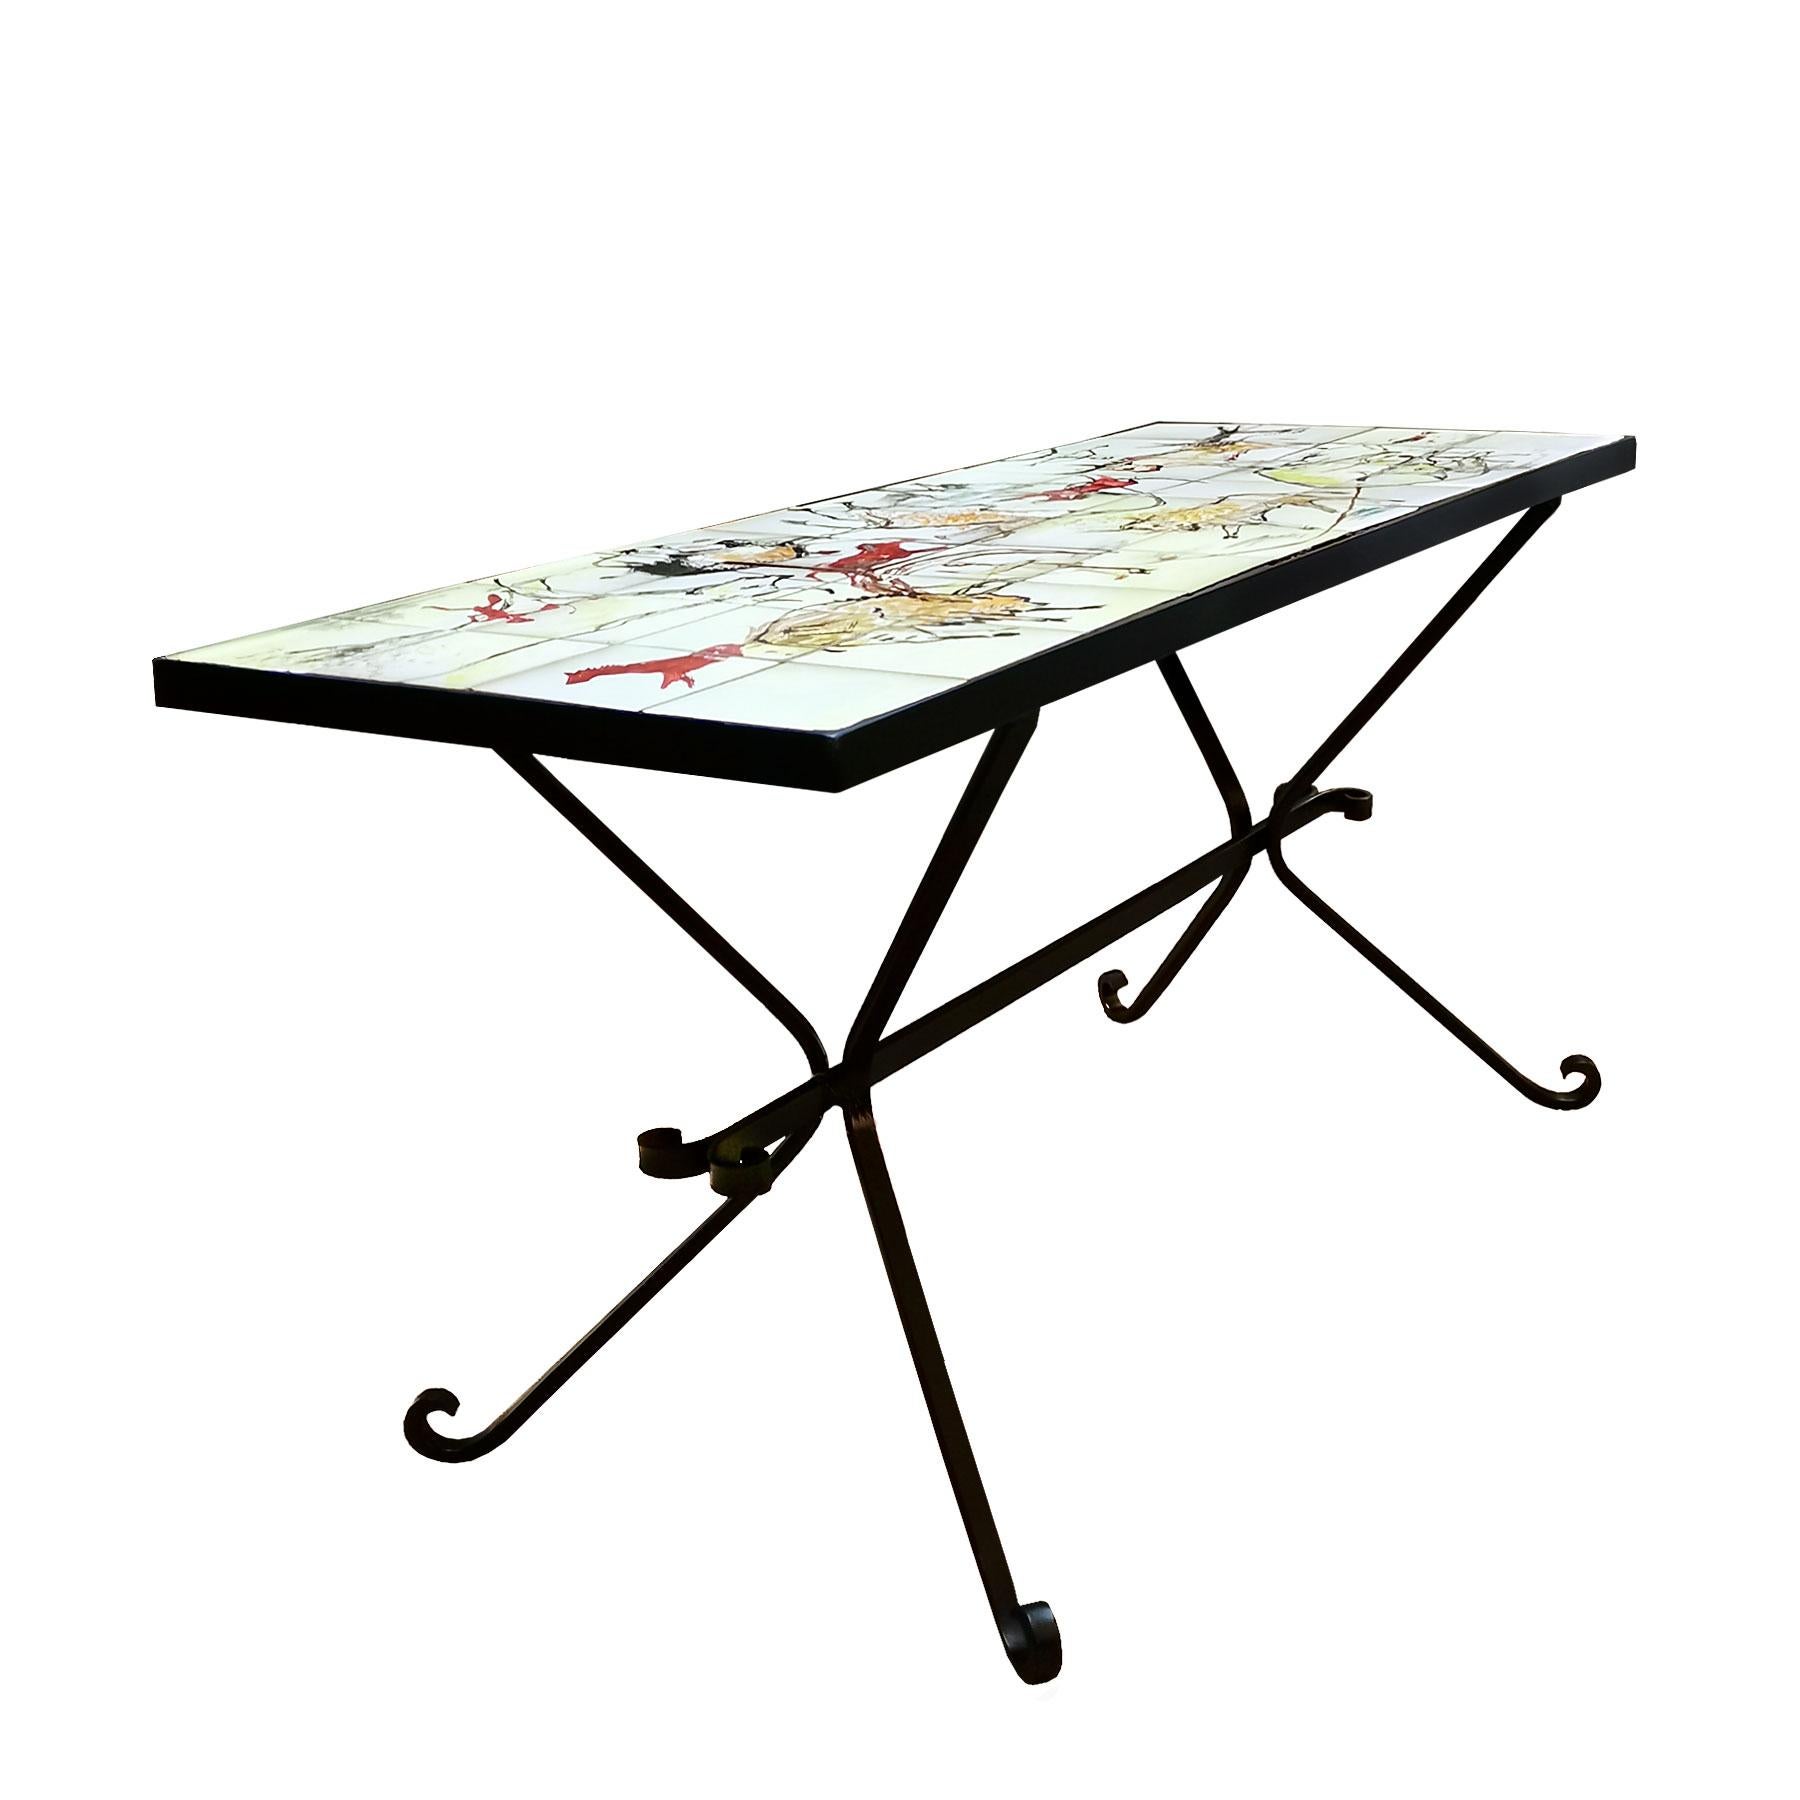 Coffee table in wrought iron, hand painted ceramic tiles.
Signed: Gres Guérin - Belgique 1958.

Belgique, 1958.